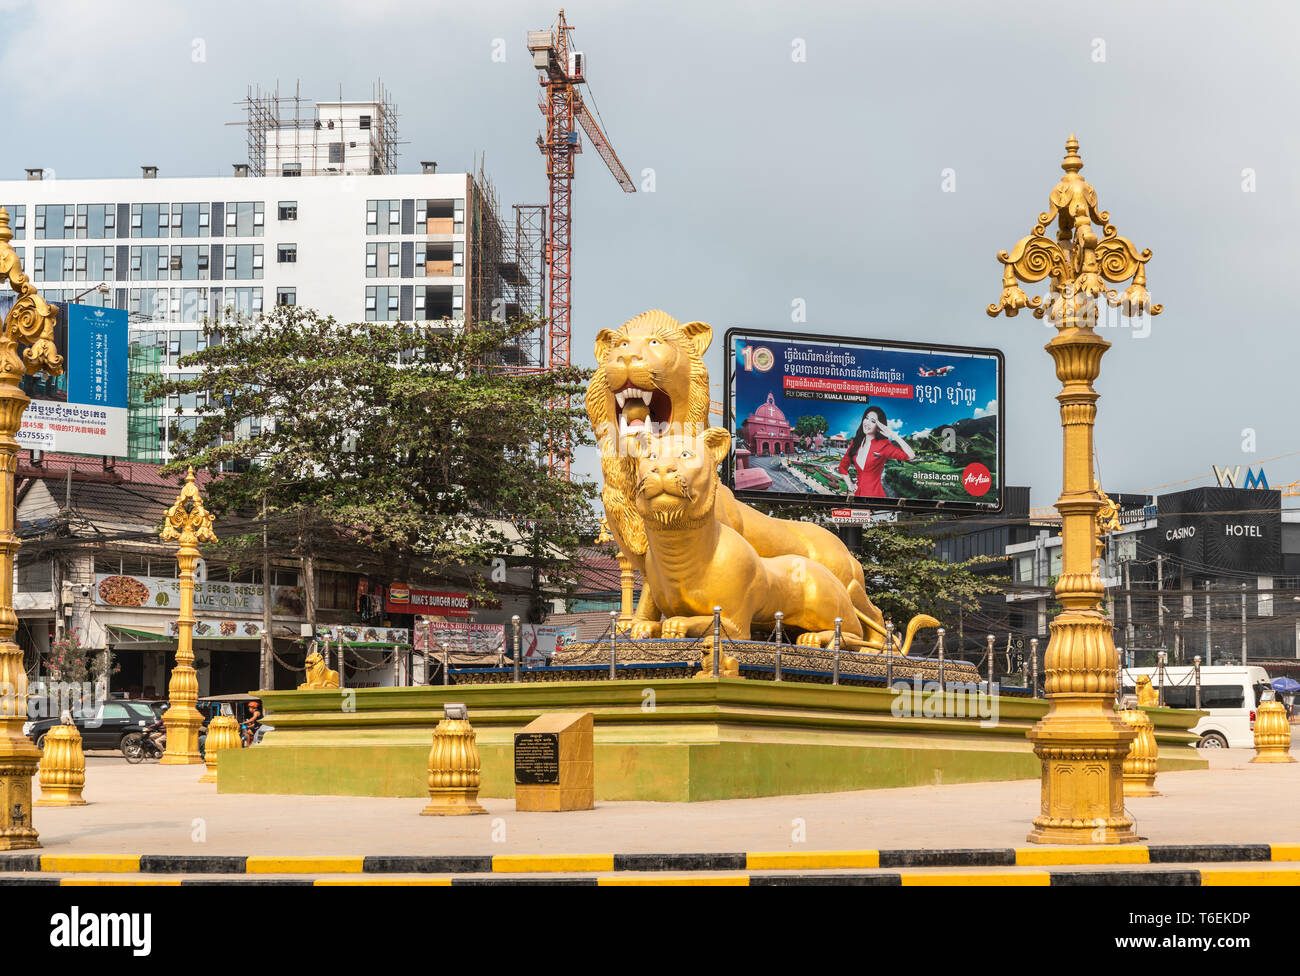 Sihanoukville, Cambodia - March 15, 2019: Golden Lions Roundabout. Front of giant statues of the beasts. Lanterns, Construction and cranes. Stock Photo